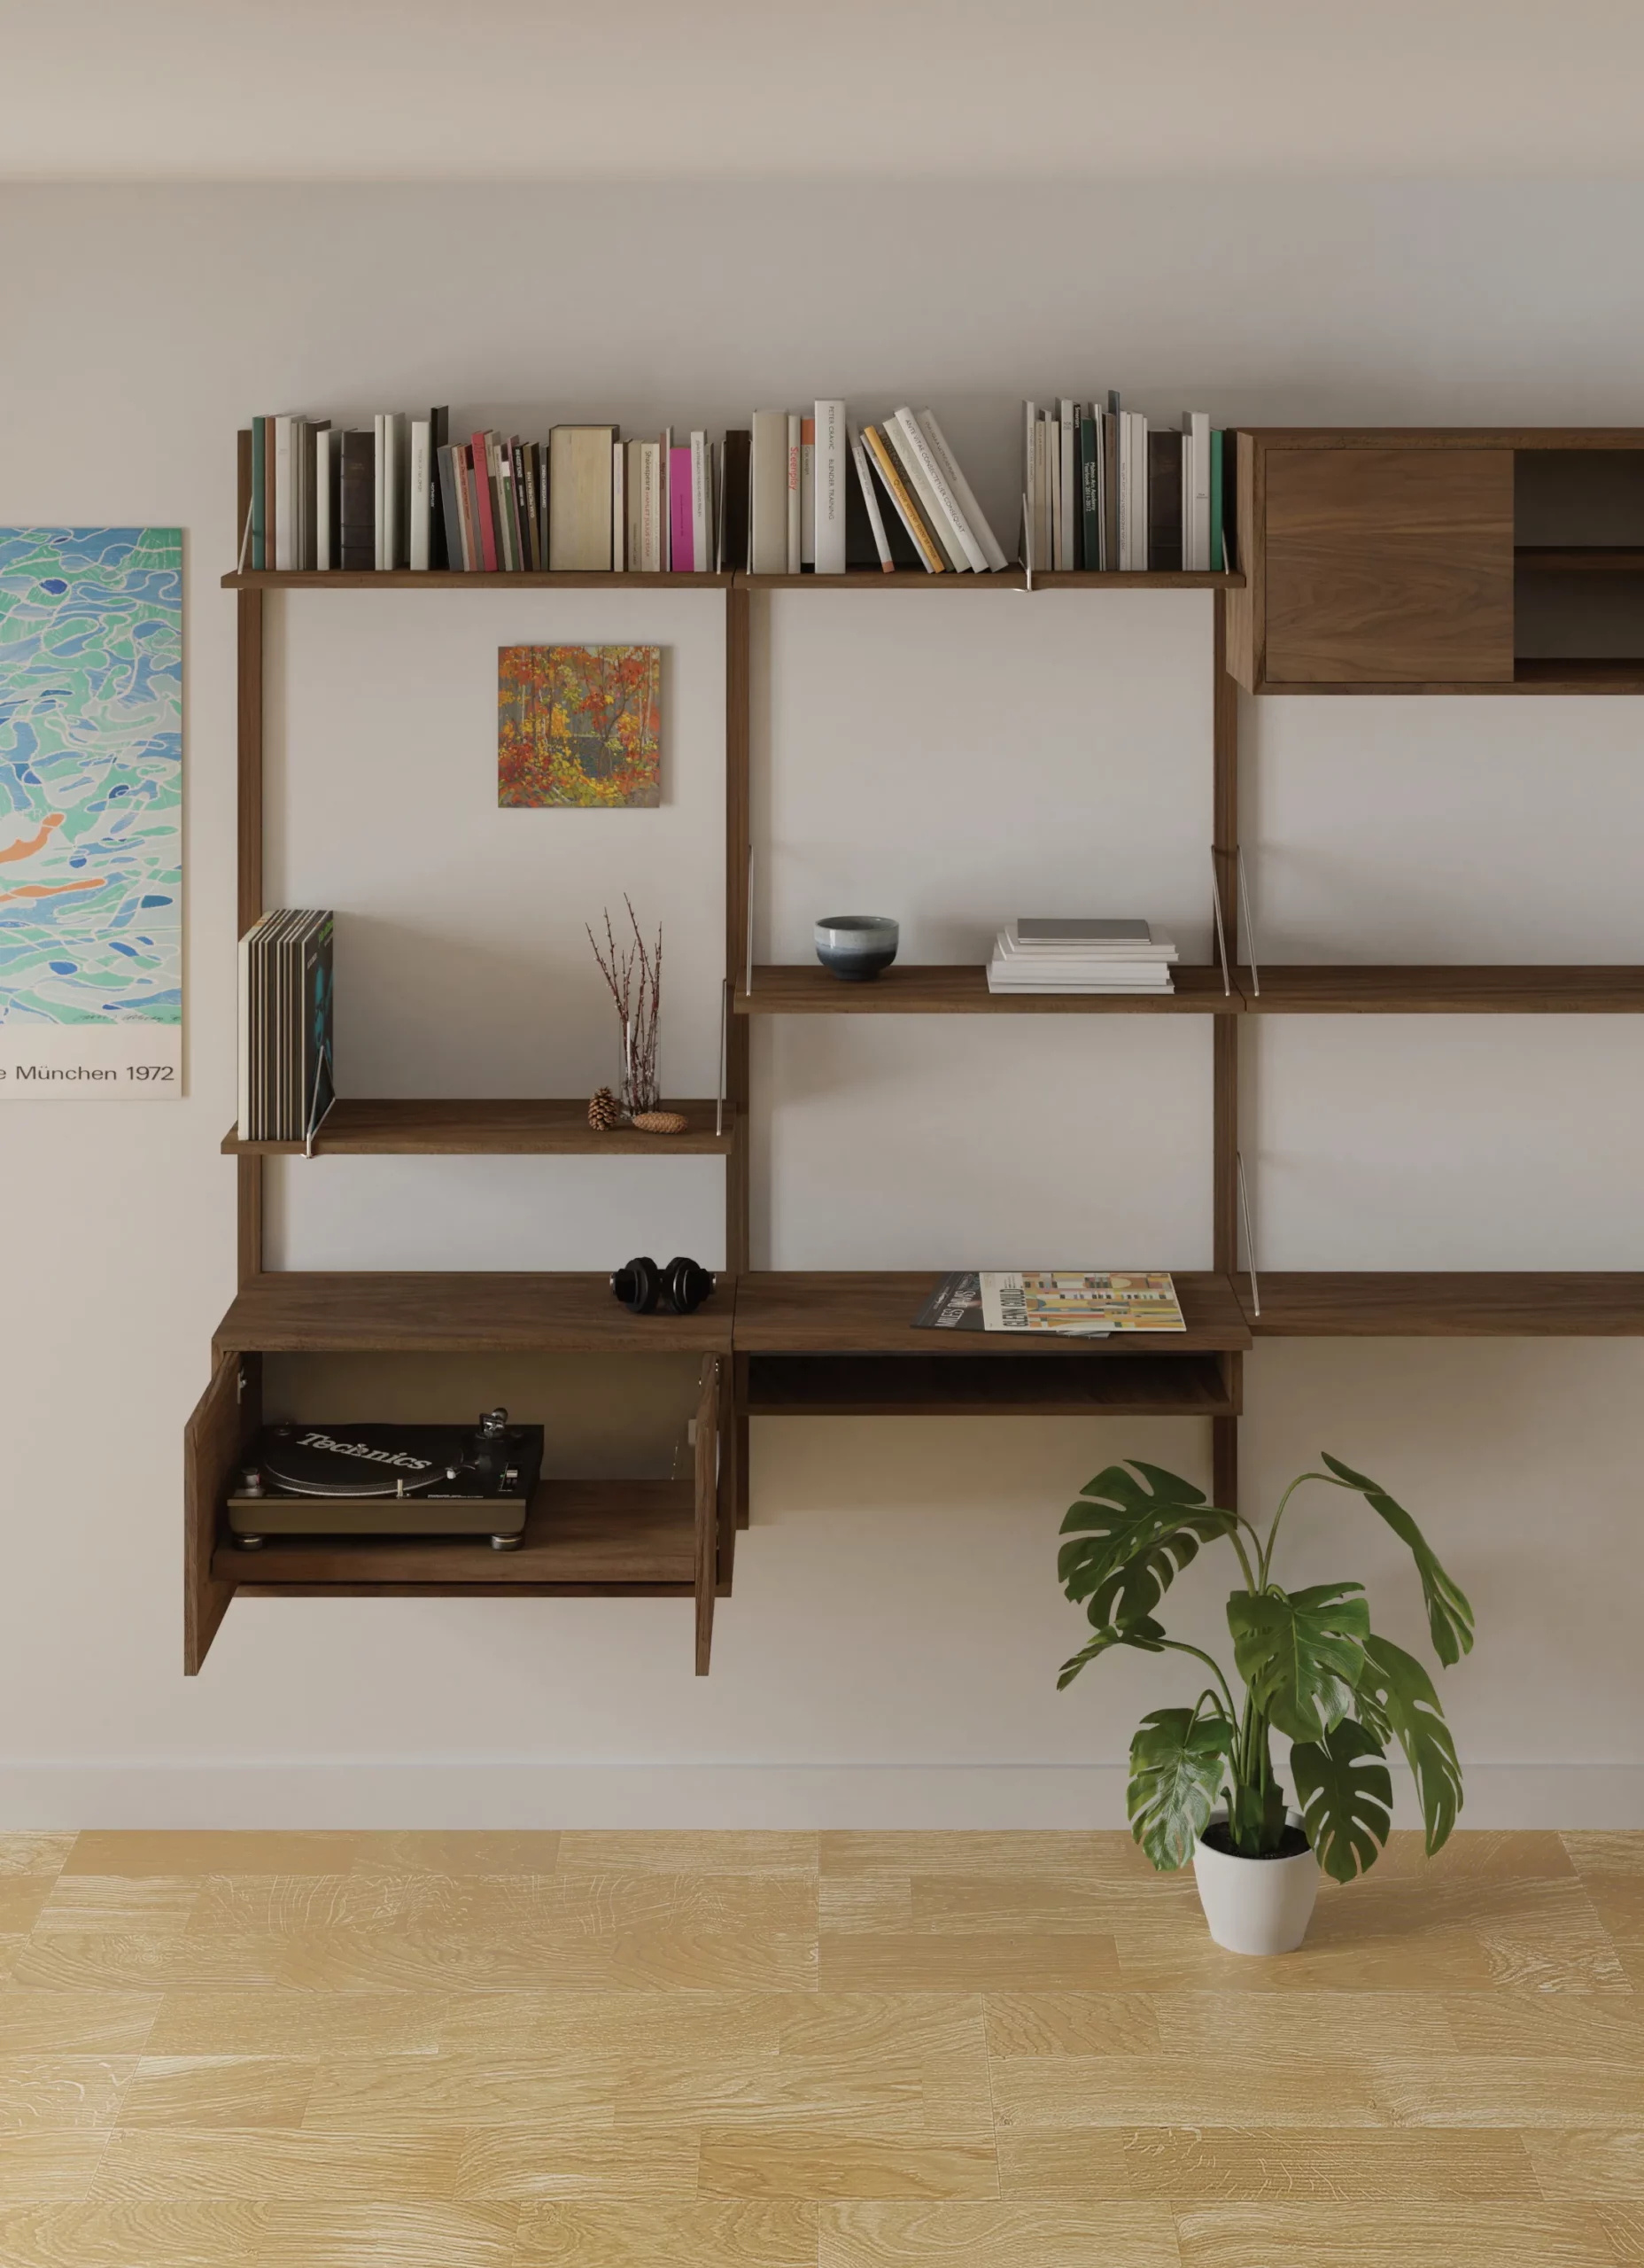 The Modeller shelf system inspired by mid-century modern designs: Cado Royal System and Vitsoe 606 Universal shelving. New hardware handmade sustainably